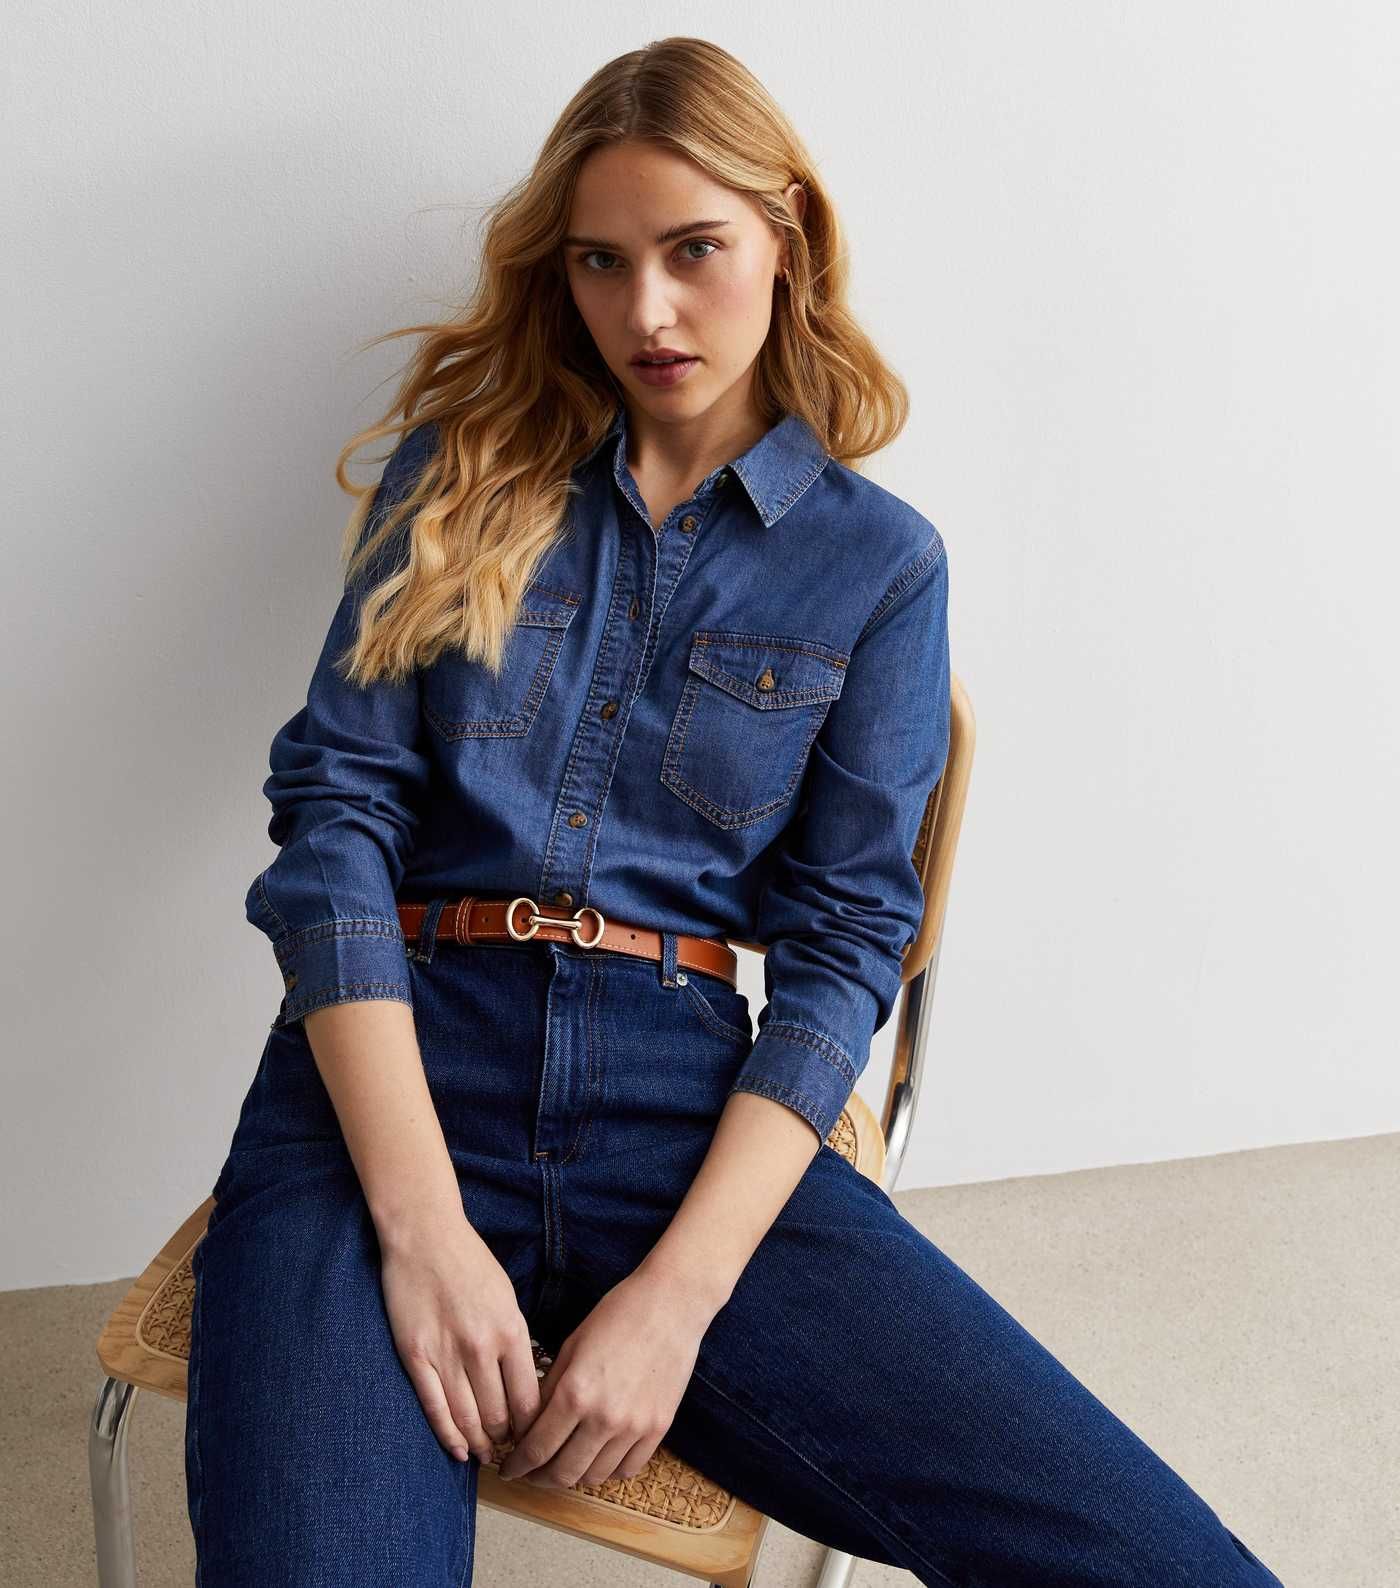 Blue Denim-Look Long Sleeve Shirt
						
						Add to Saved Items
						Remove from Saved Items | New Look (UK)